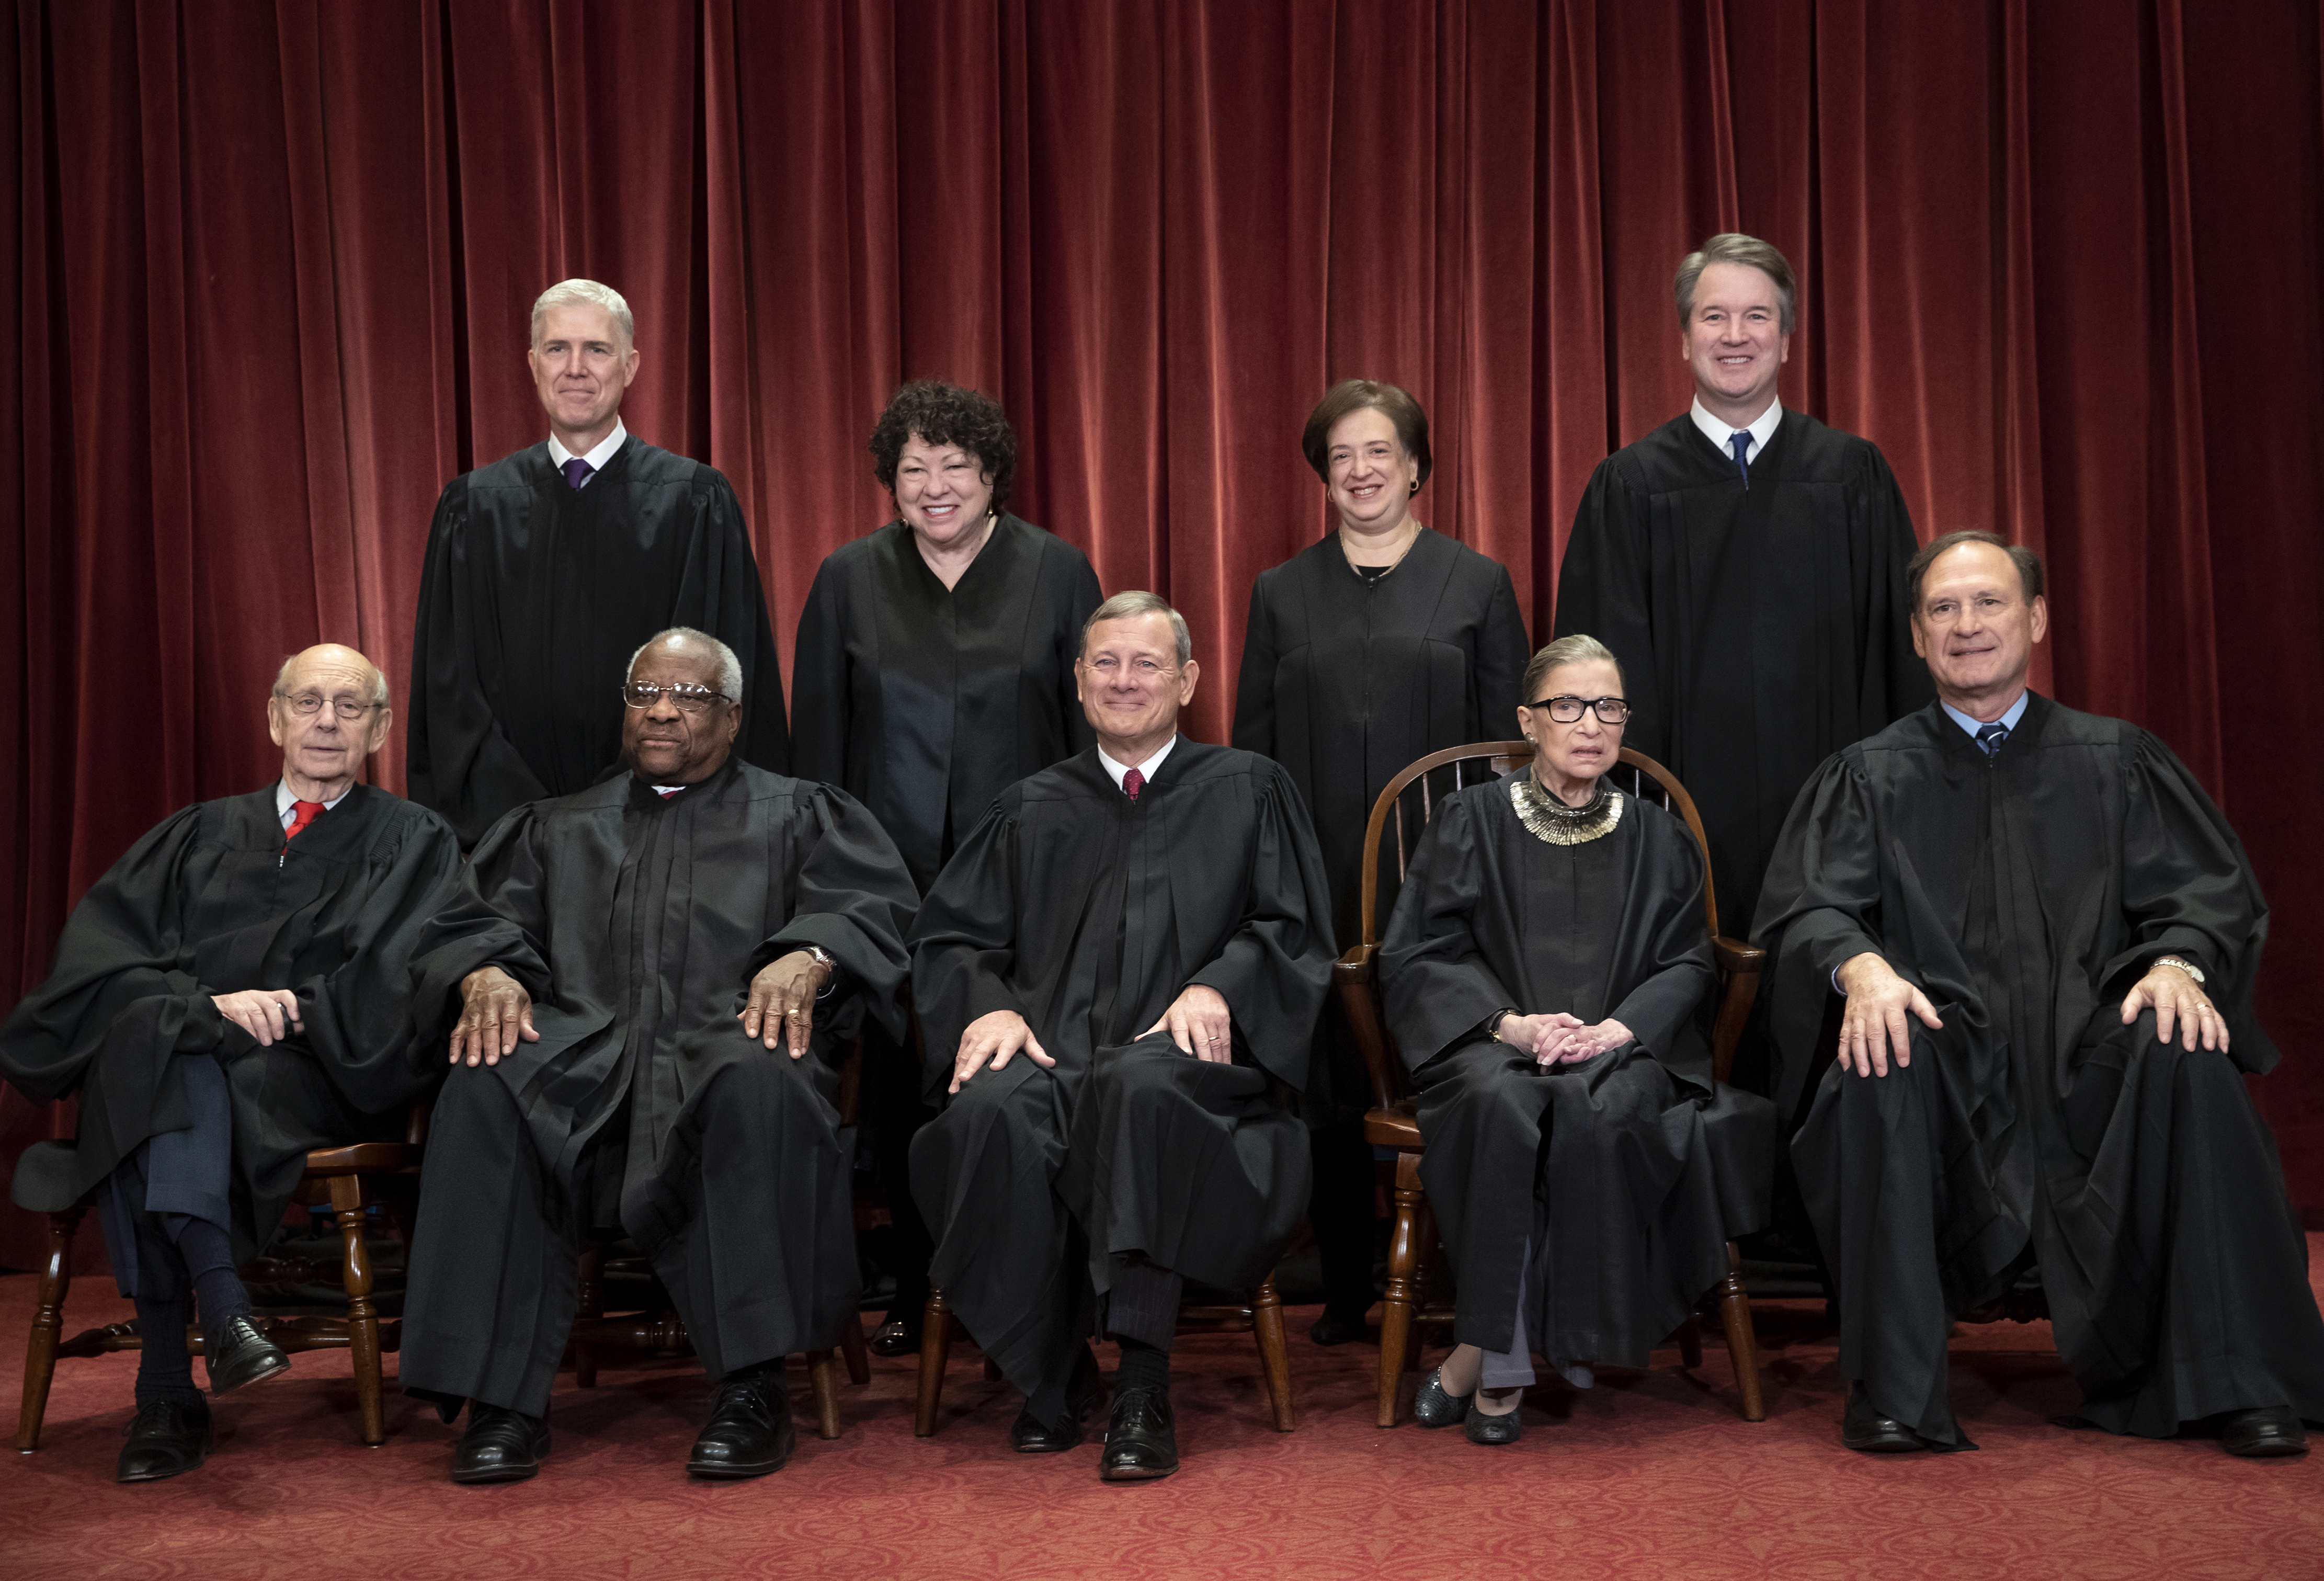 Members of the US Supreme Court